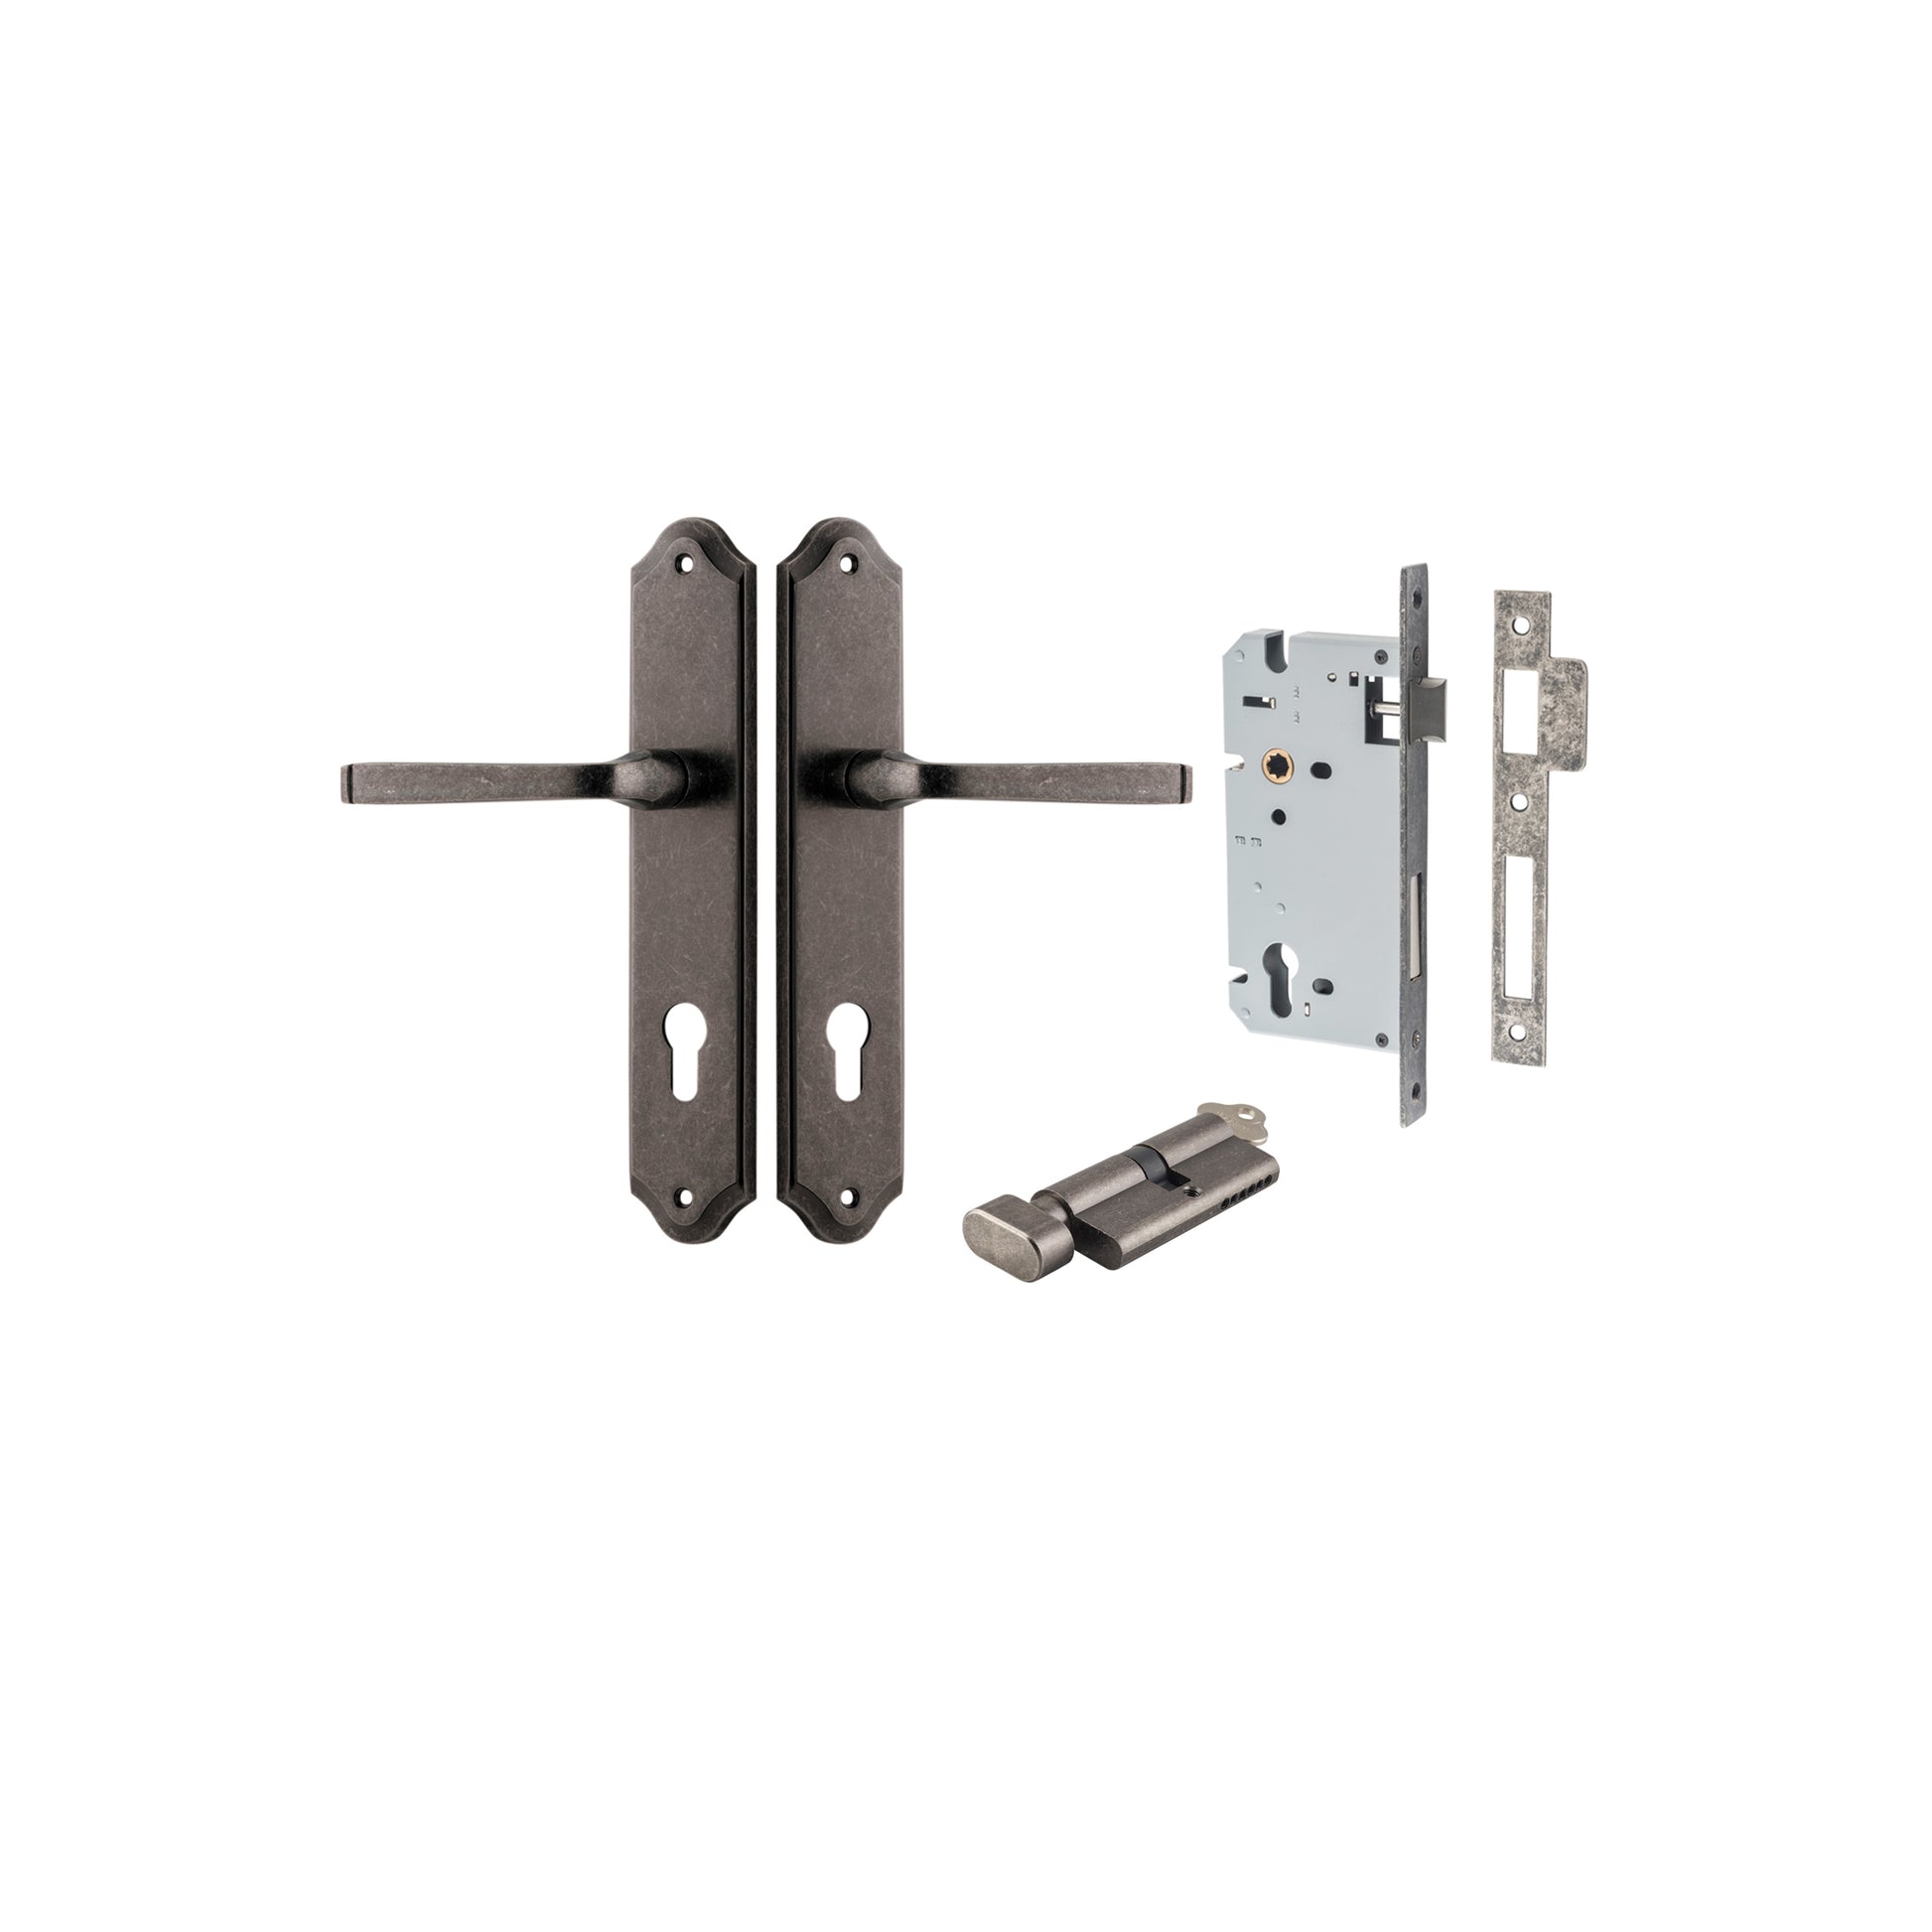 Door Lever Annecy Shouldered Euro Distressed Nickel CTC85mm H240xW50xP65mm Entrance Kit, Mortice Lock Euro Distressed Nickel CTC85mm Backset 60mm, Euro Cylinder Key Thumb 6 Pin Distressed Nickel L70mm KA1 in Distressed Nickel